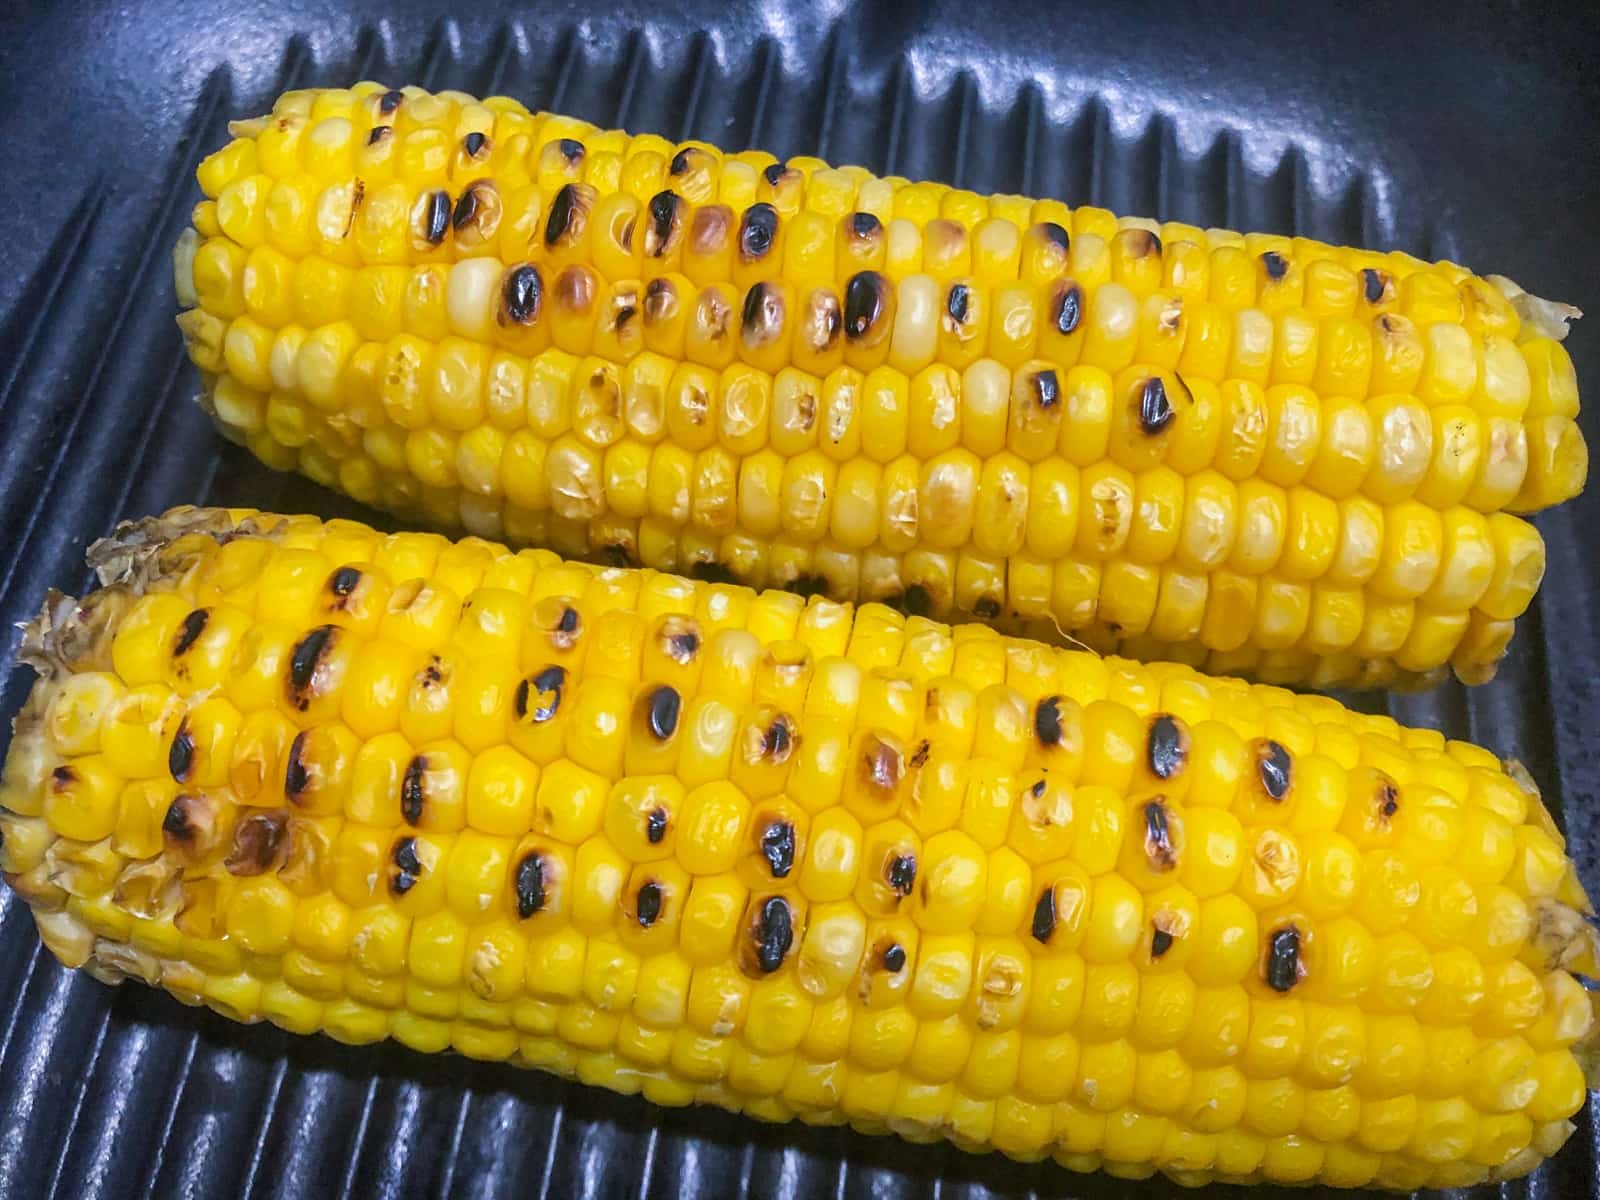 2 corn on the cob being charred on a hot grill pan.